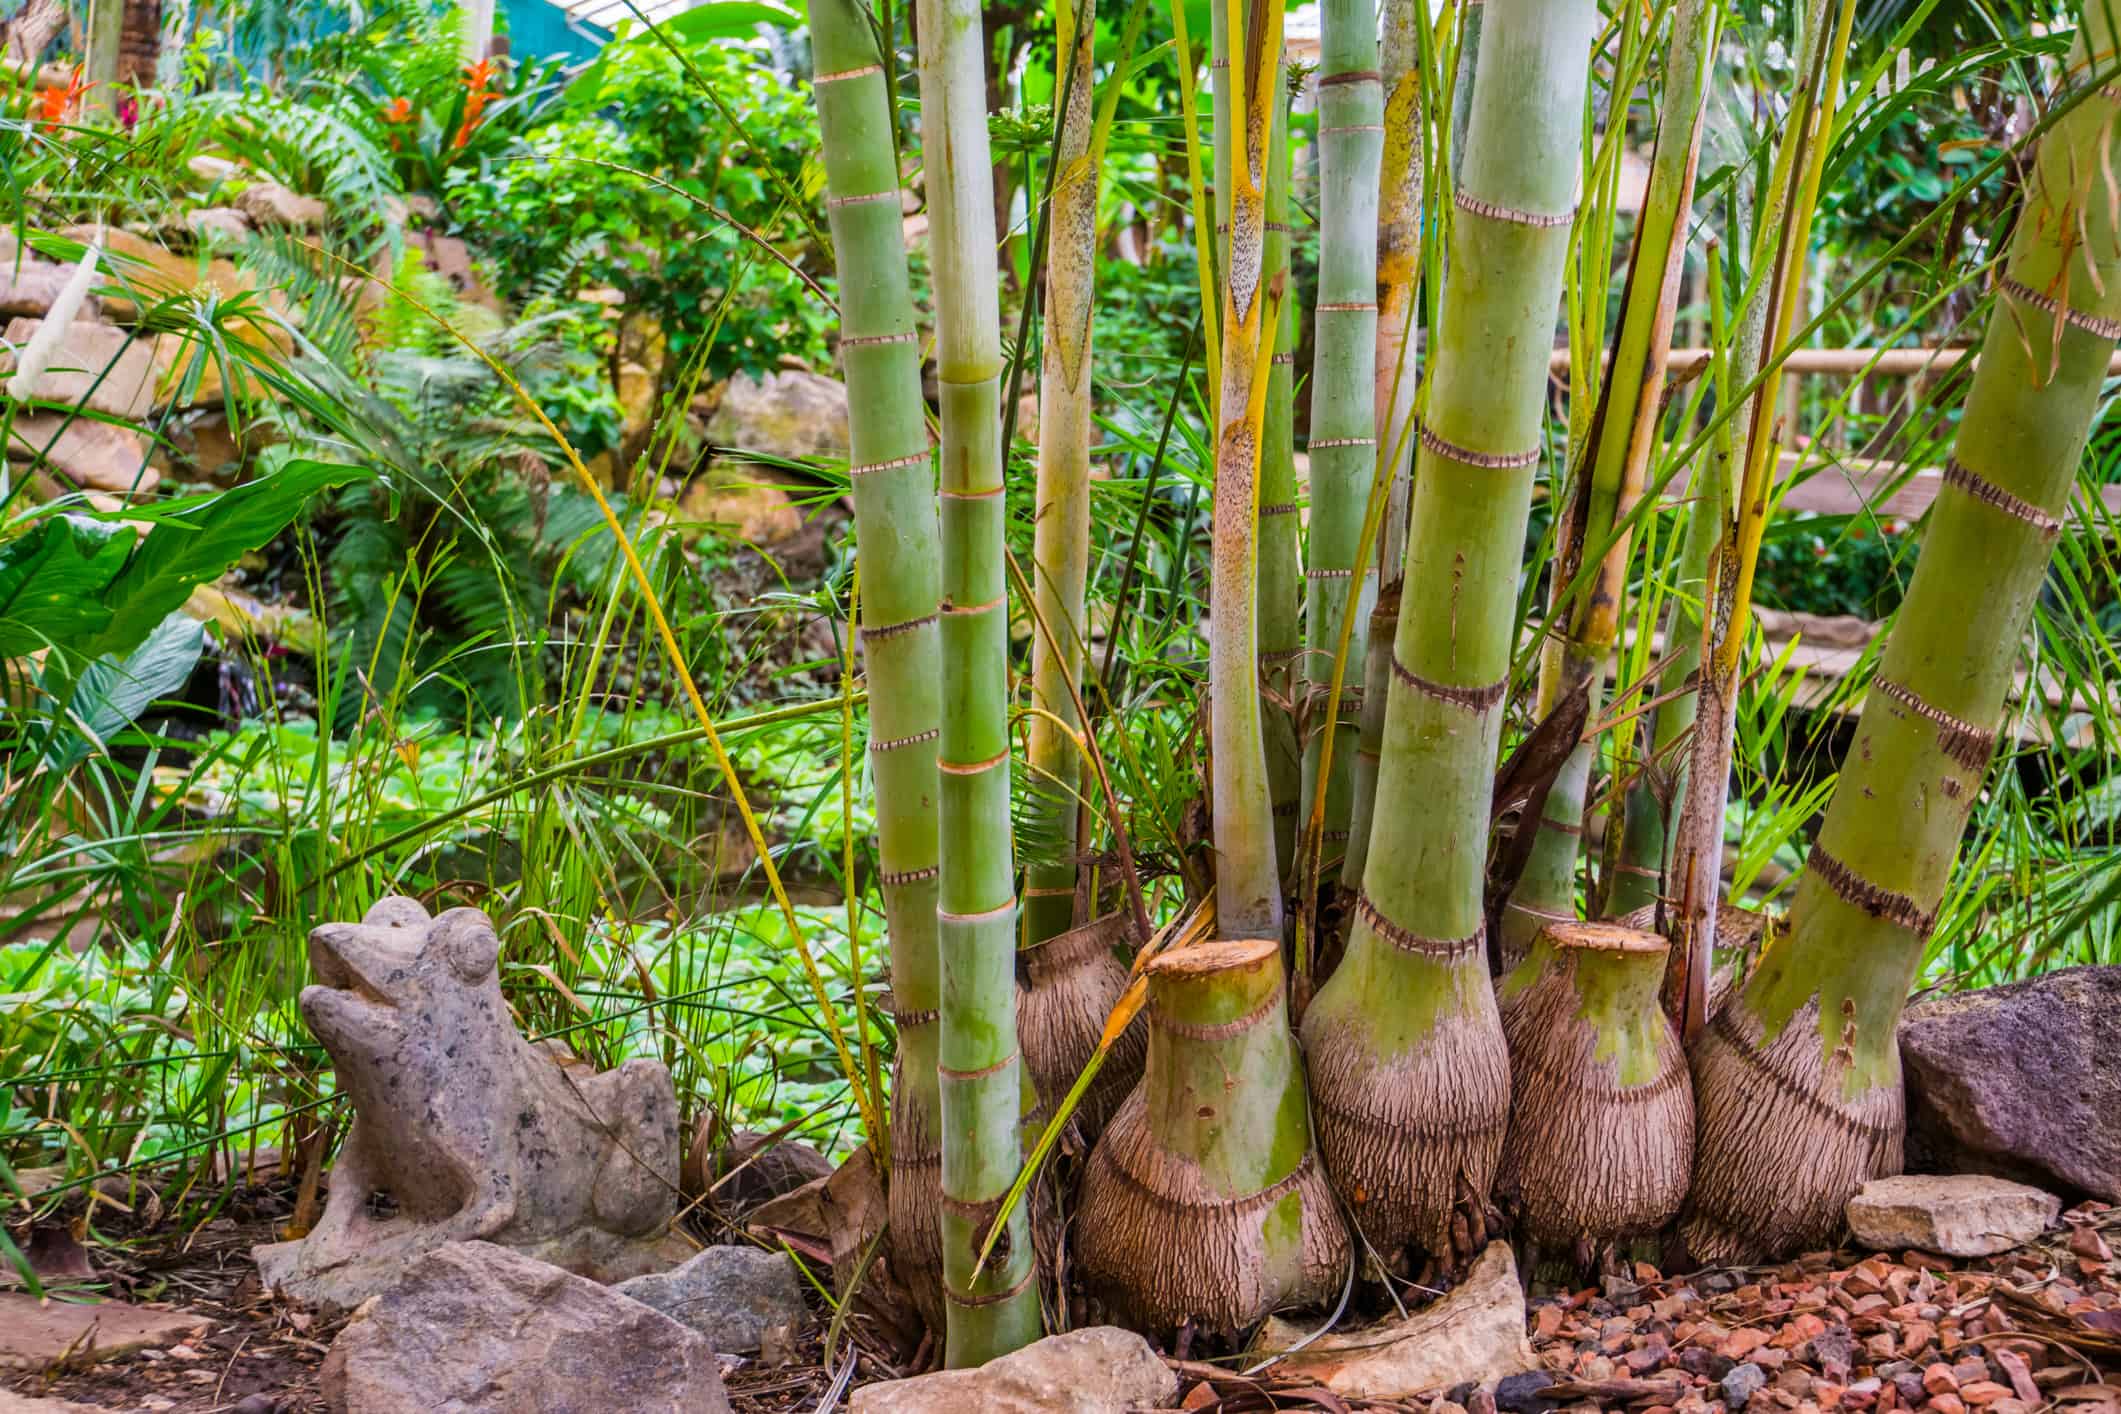 Bamboo trunks of a giant bamboo